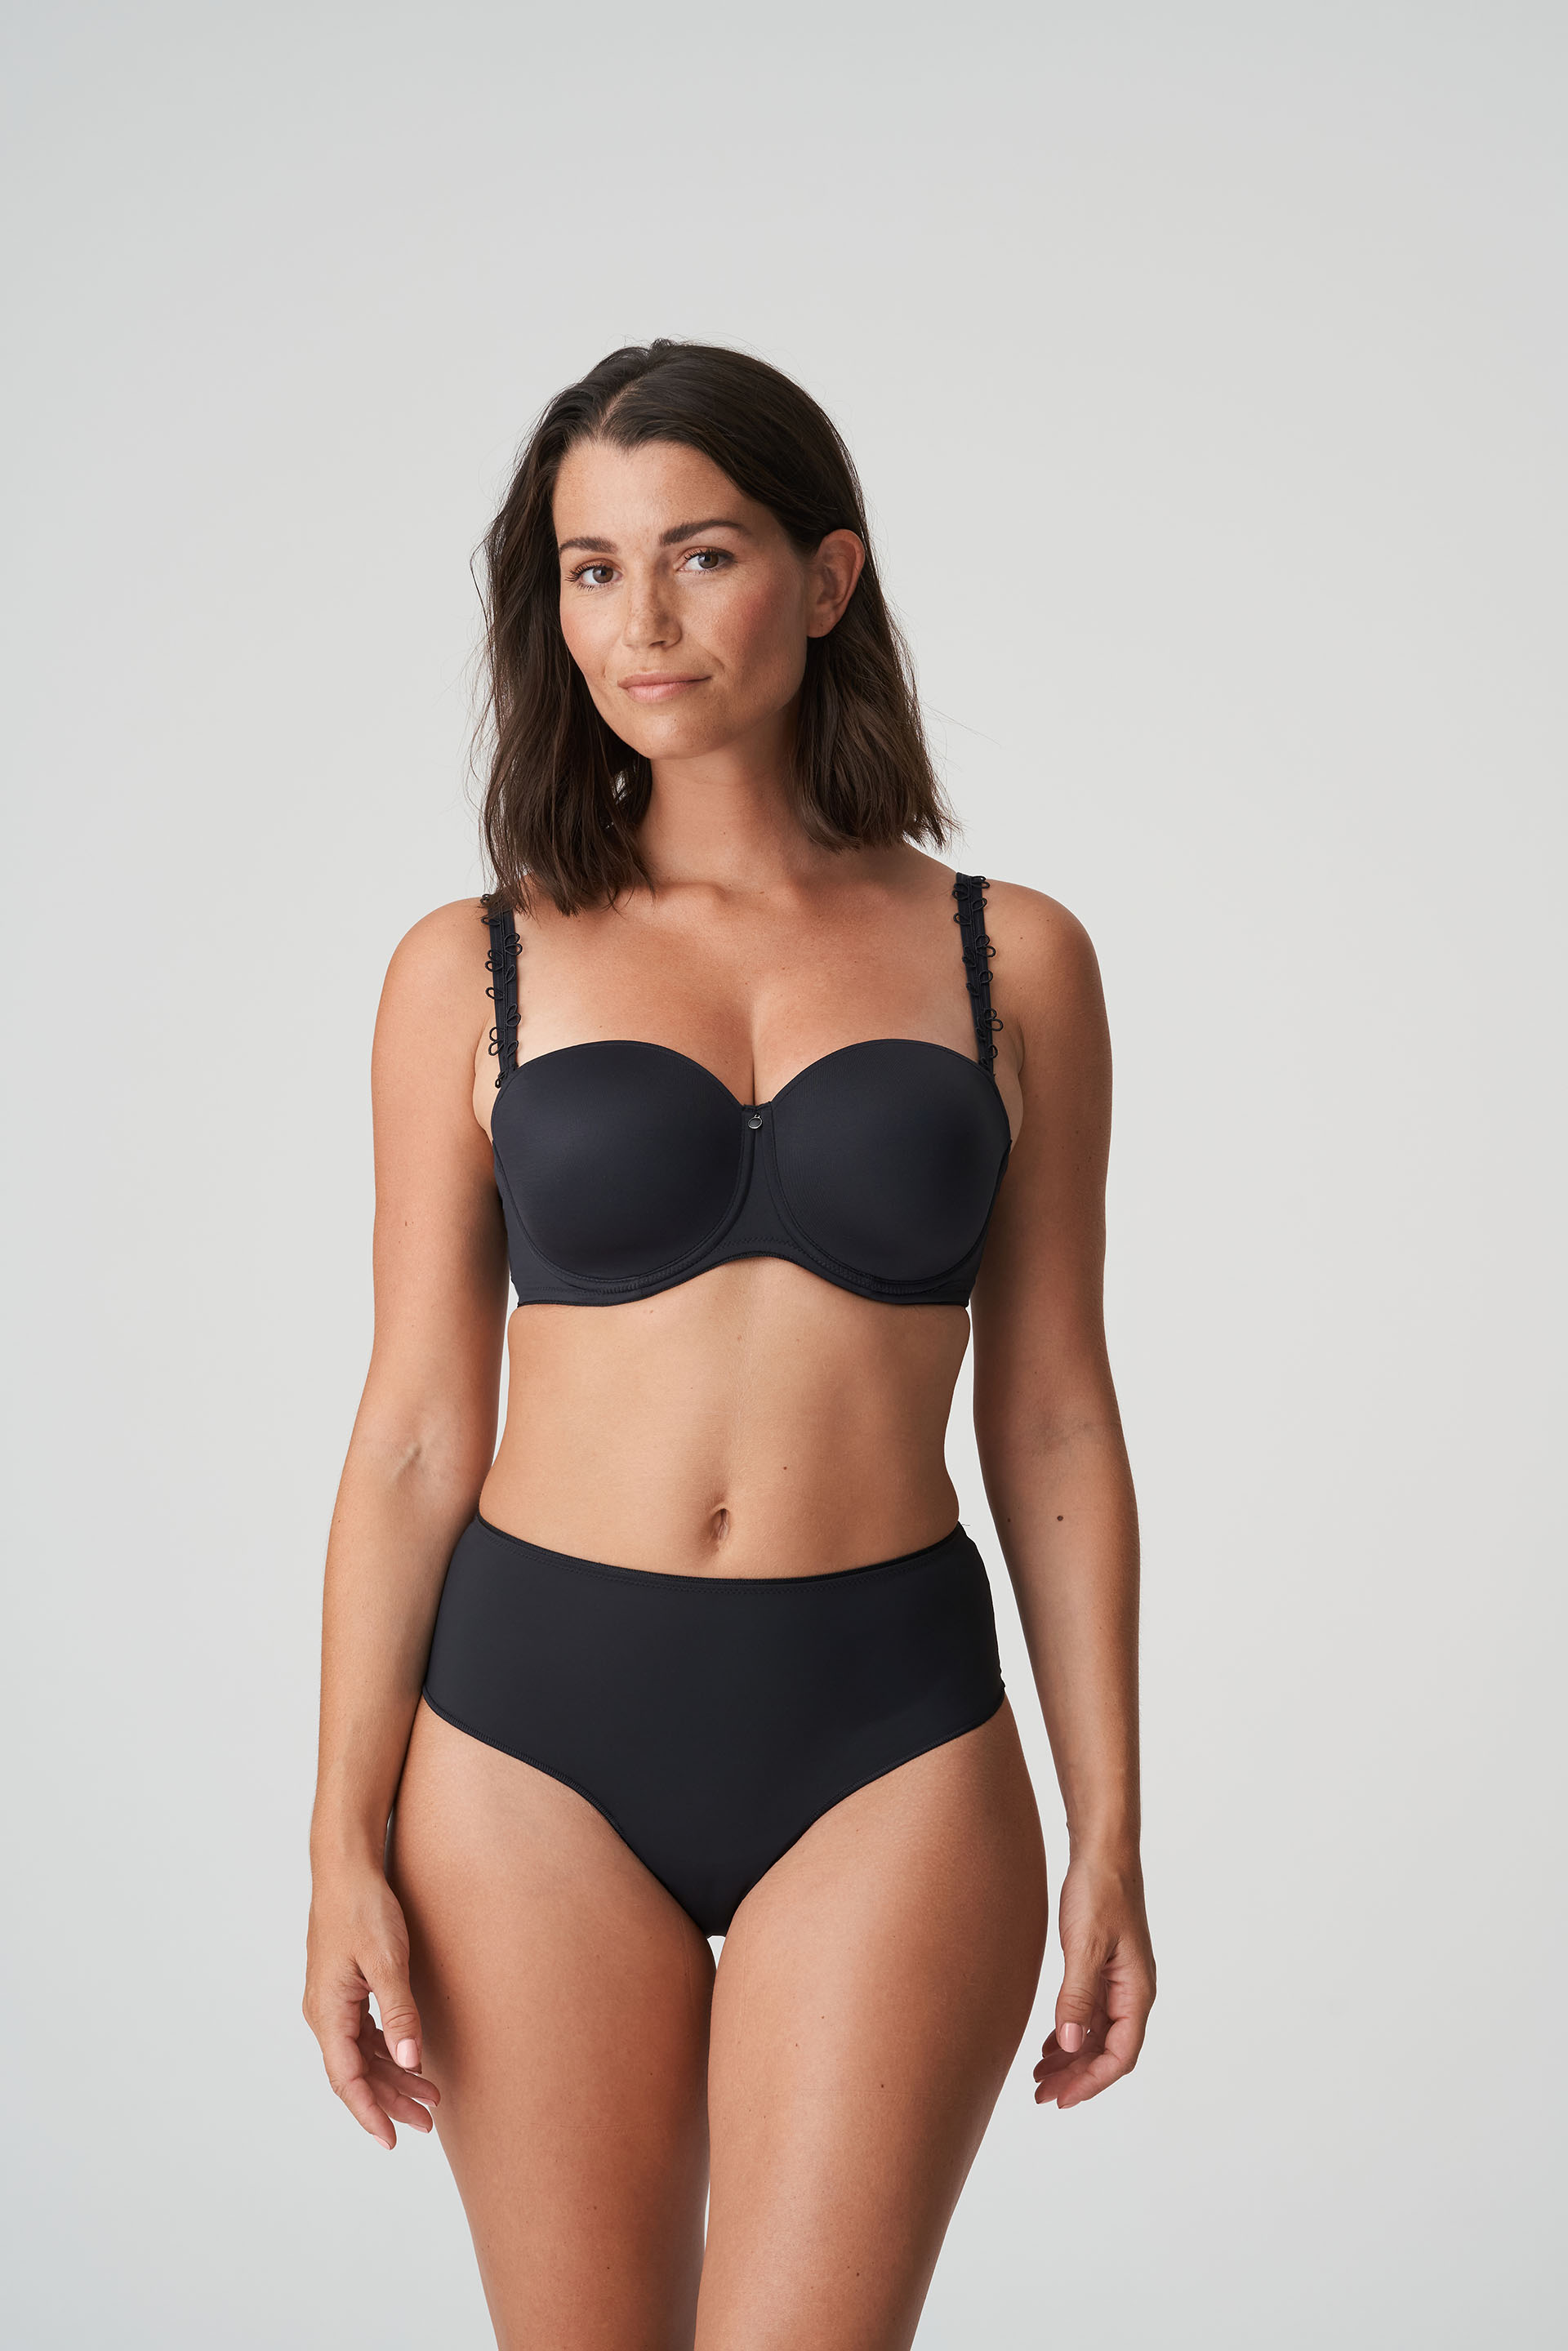 PrimaDonna Perle Strapless bra in charcoal (Black) 38G ONLY